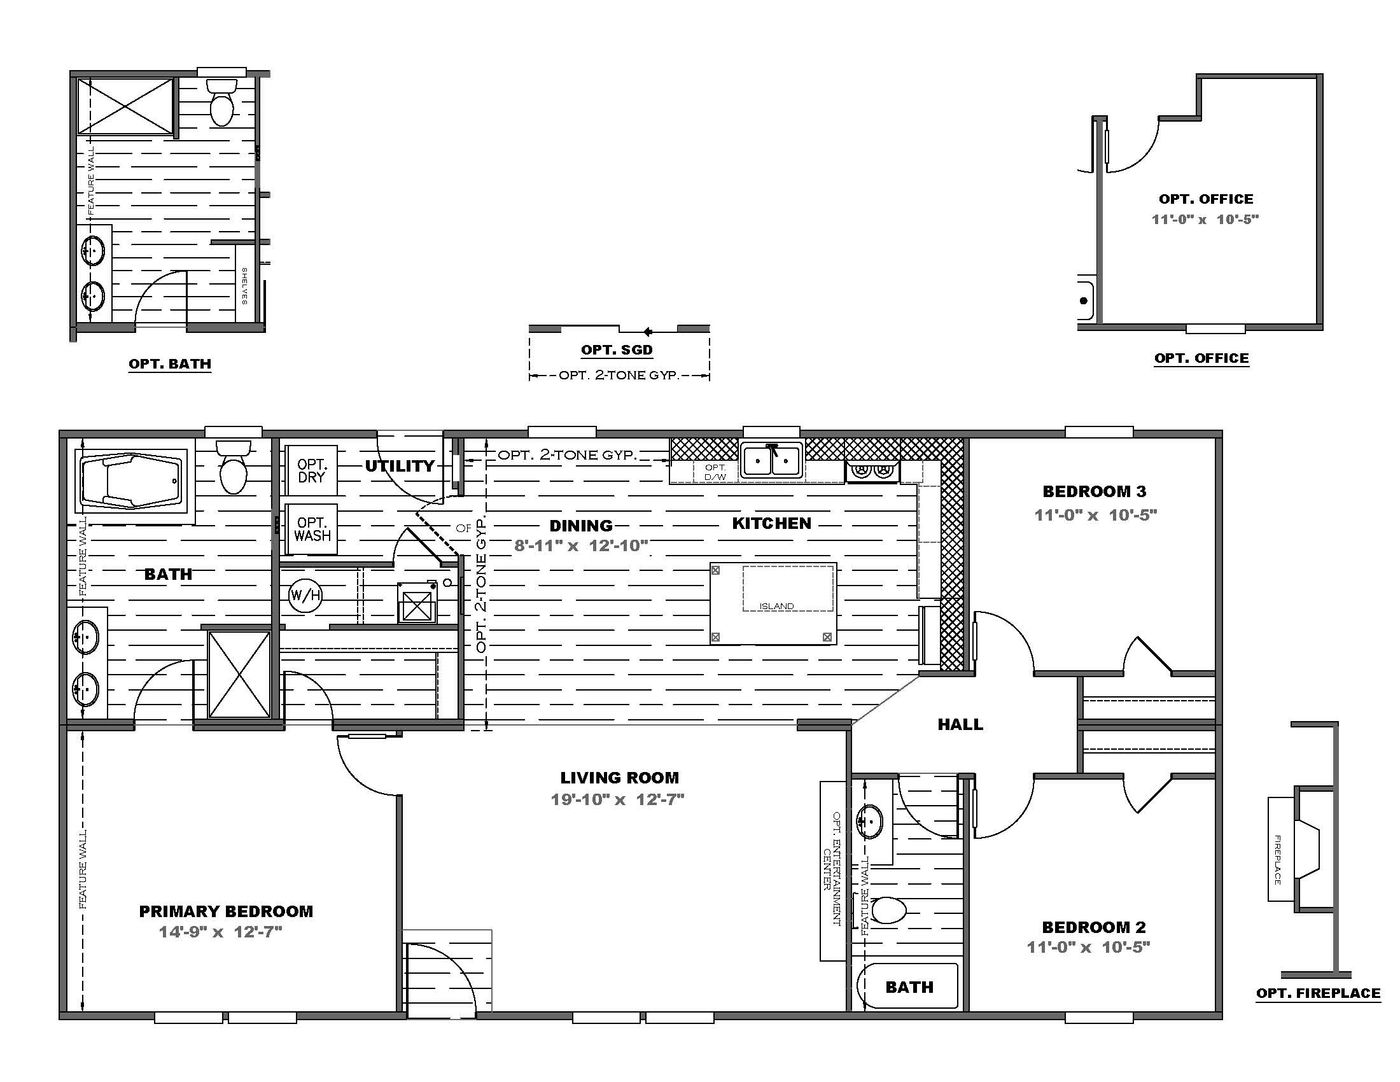 The TRADITION 52B Floor Plan. This Manufactured Mobile Home features 3 bedrooms and 2 baths.